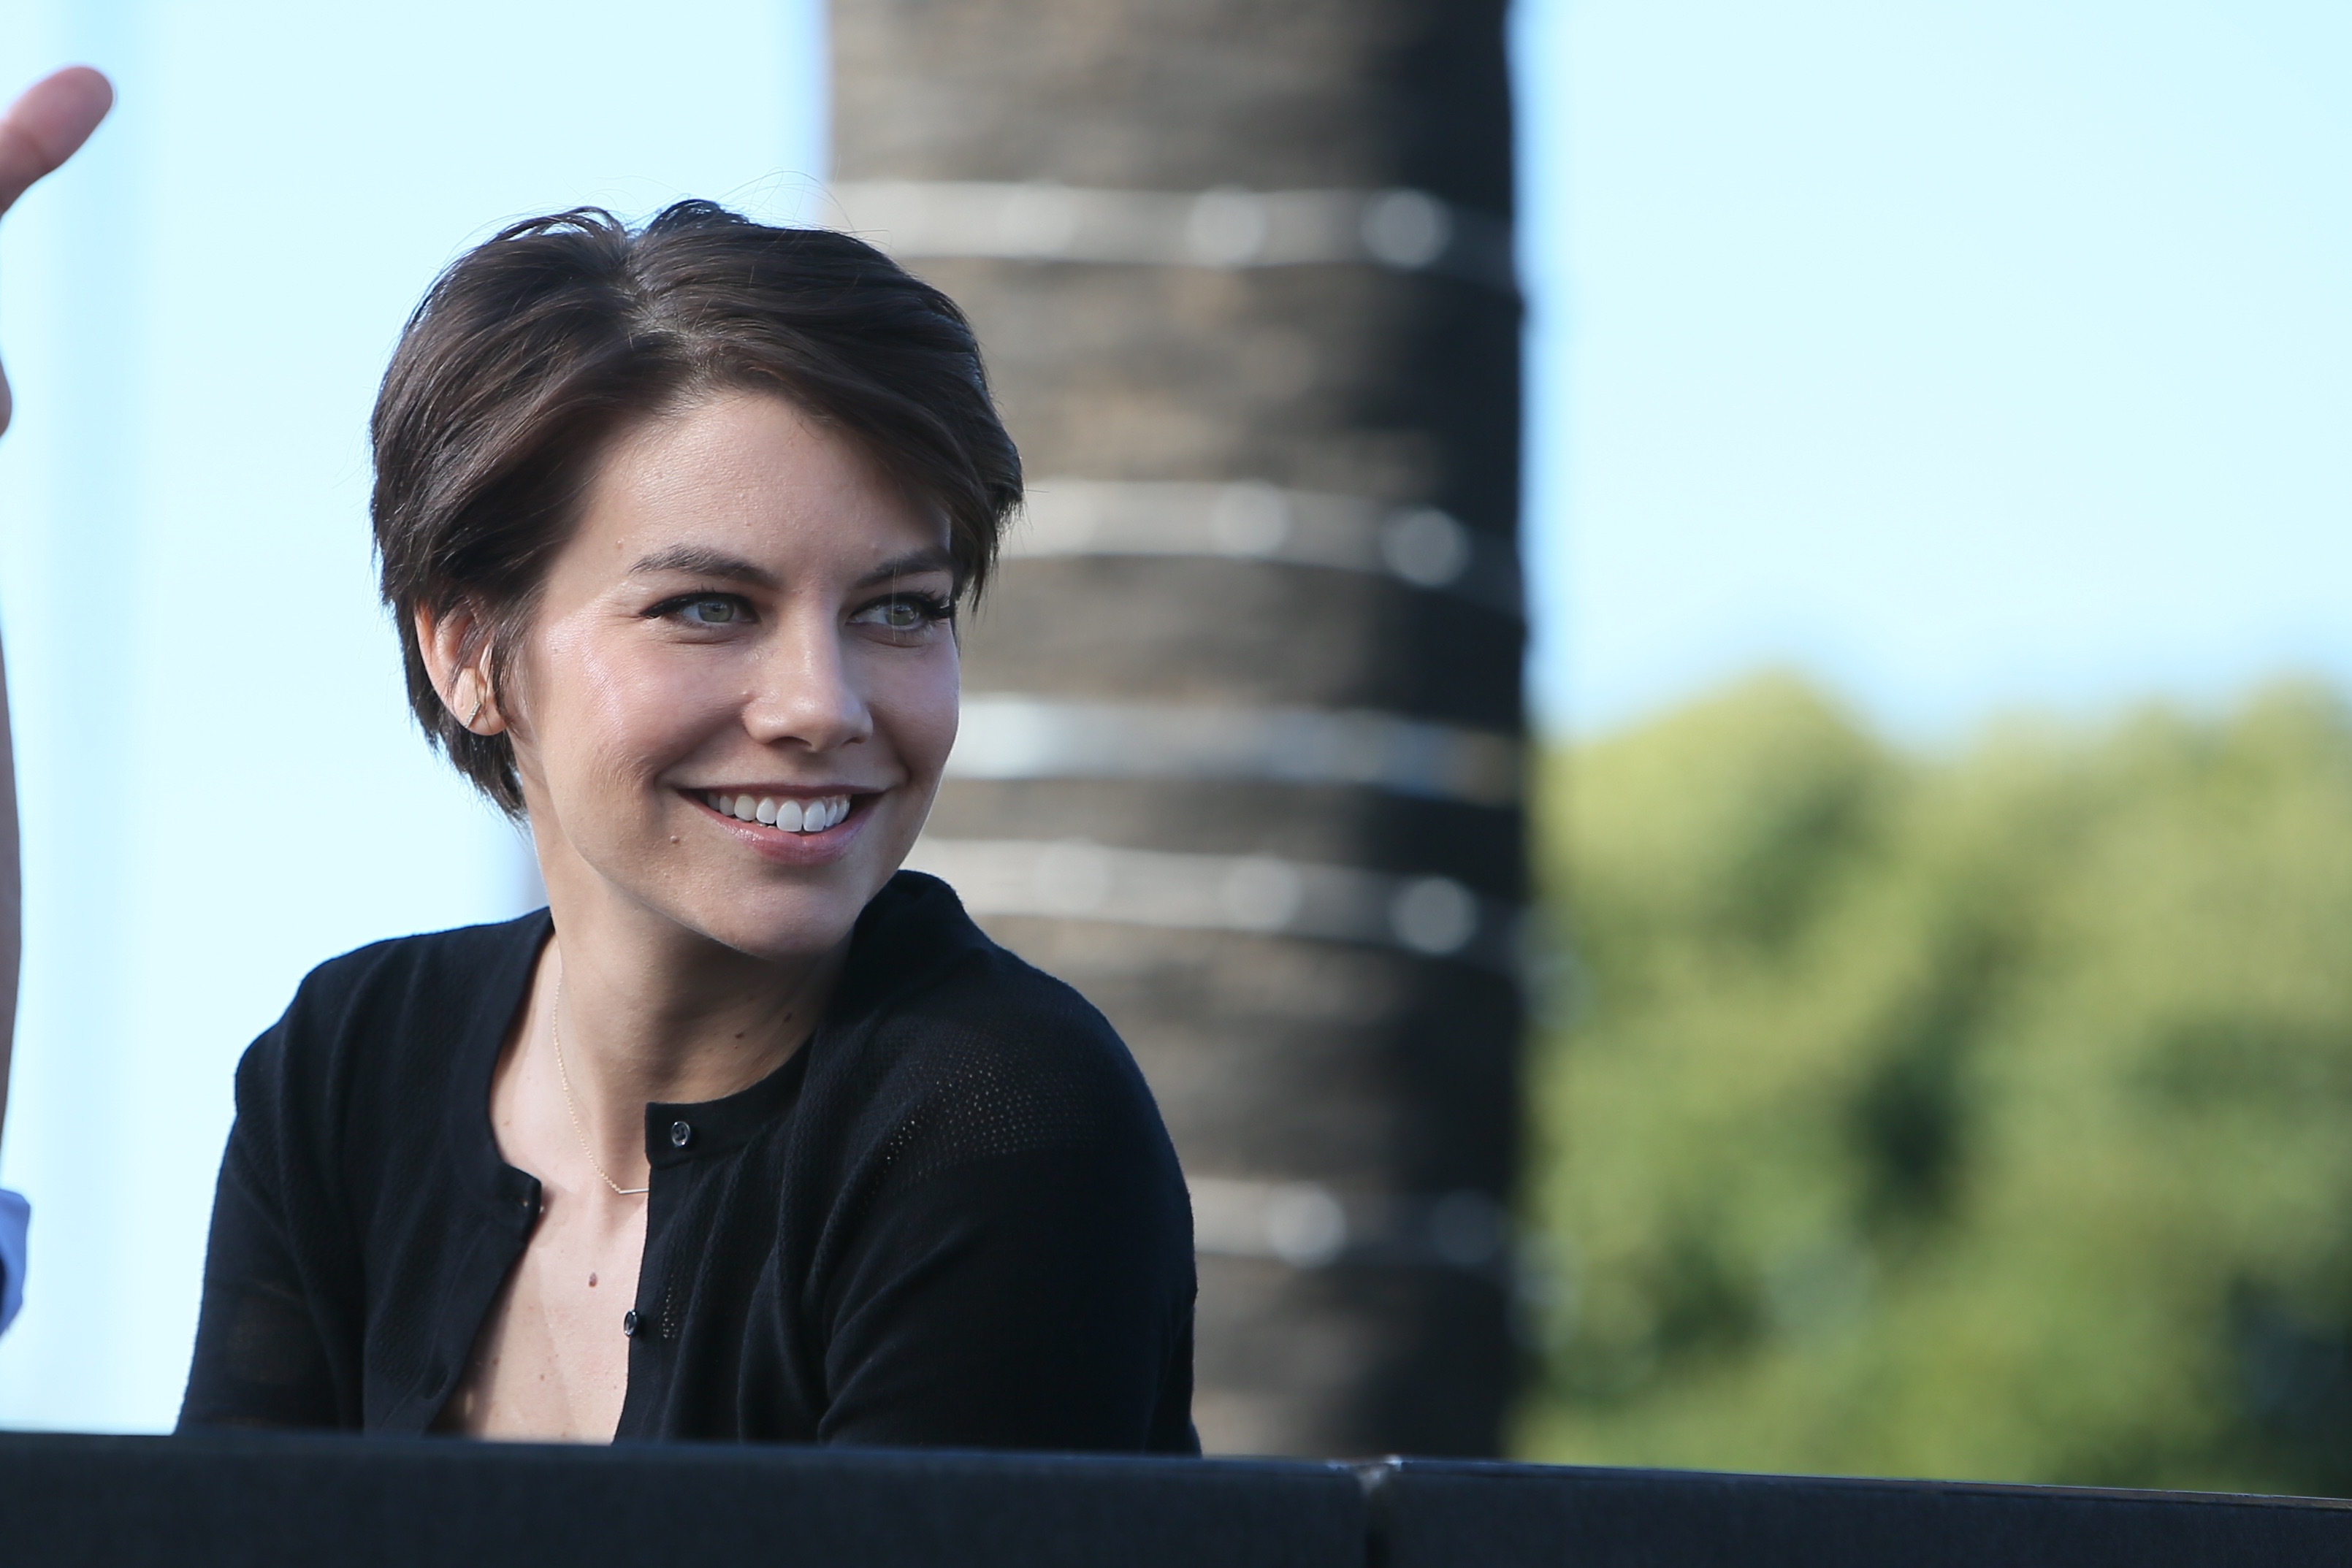 Lauren Cohan seen at Universal Studios where she was interviewed by Mario Lopez for television show 'Extra' Featuring: Lauren Cohan Where: Los Angeles, California, United States When: 12 Jan 2016 Credit: Michael Wright/WENN.com